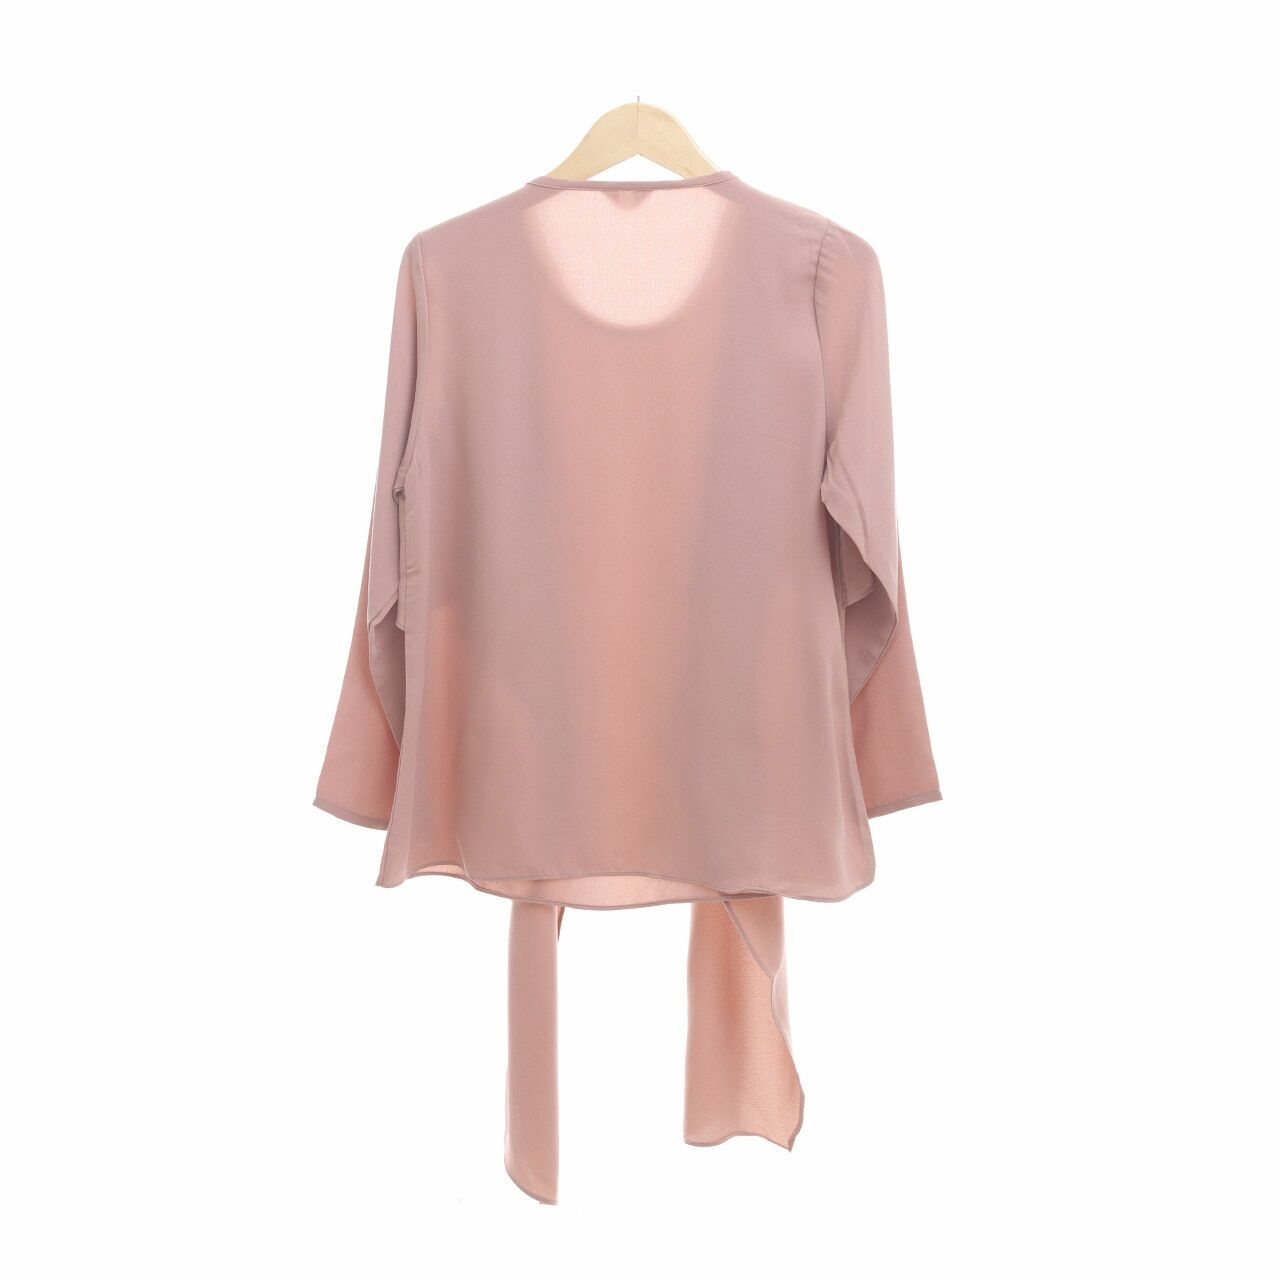 Covering Story Dusty Pink Blouse